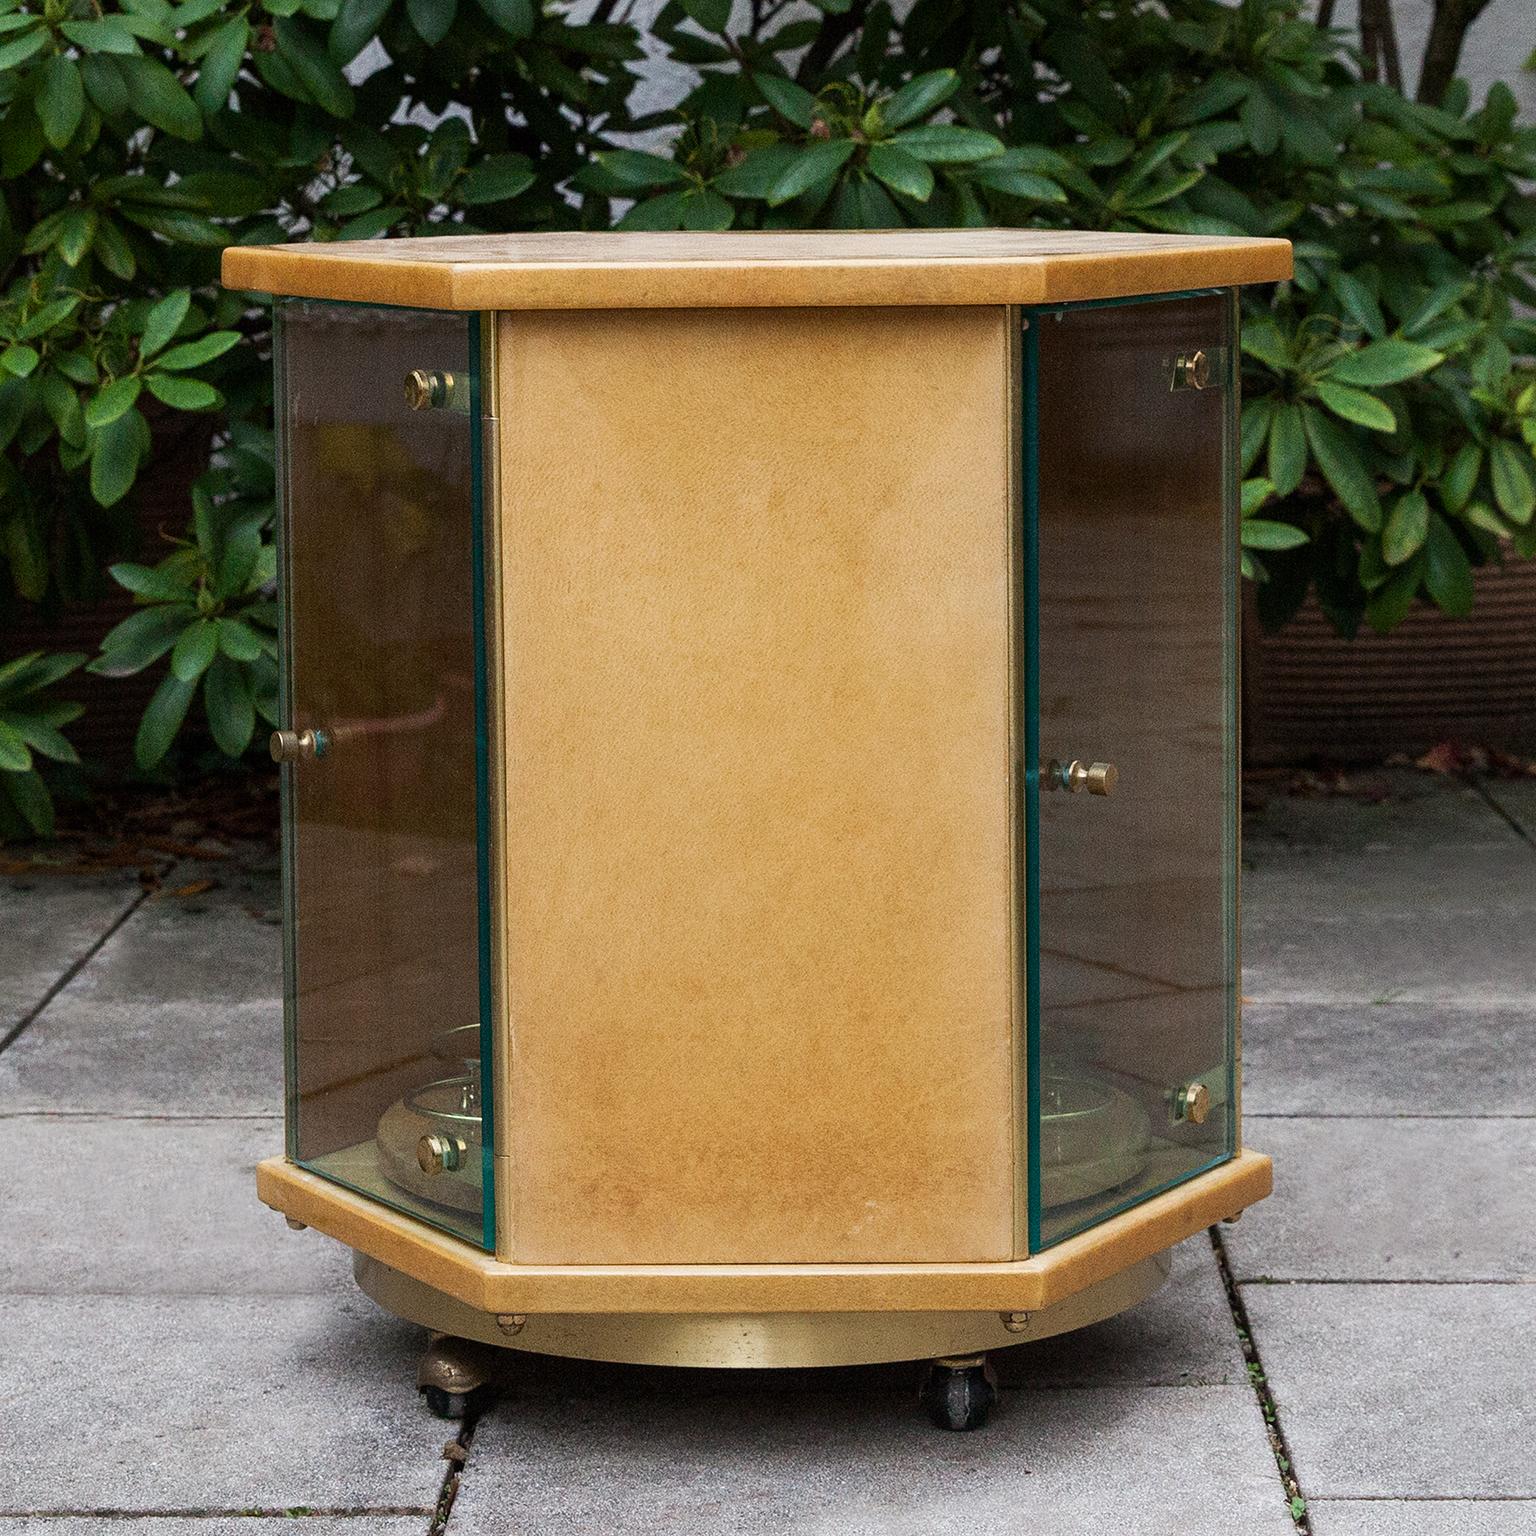 Elegant Aldo Tura bar cart on brass rolls in hexagonal shape with three glass doors and a turnable bottle holder inside.

This particular bar cart was executed, circa 1970 and is in excellent condition. Along with artists like Piero Fornasetti and